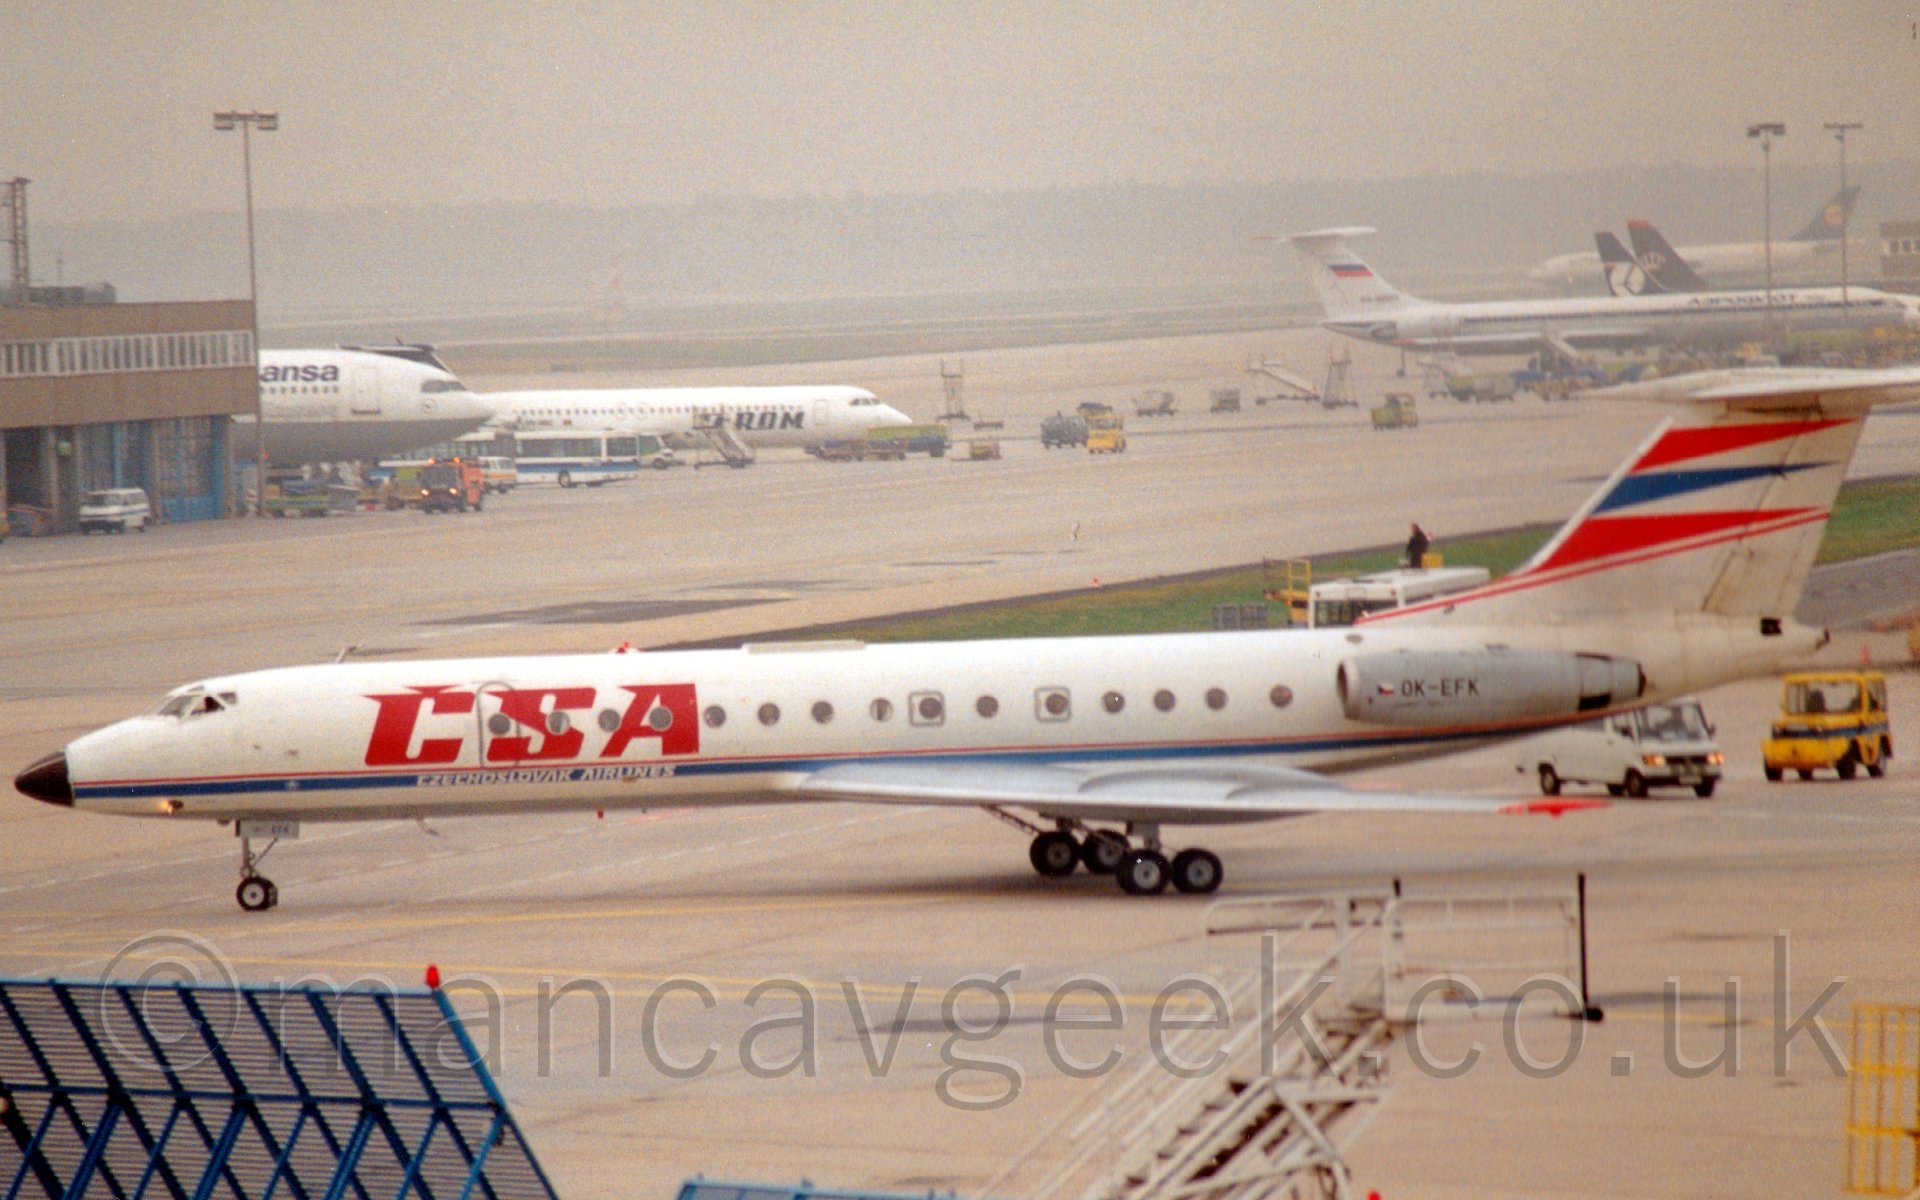 Side view of a twin engined jet airliner with a T-tail and the engines mounted on the rear fuselage, taxiing from right to left. The plane is mostly white, with a thin red and blue line runnning along the body, with large "CSA" titles on the forward fuselage, with smaller "Czechslovak Airlines" underneath. The tail is white, with what appear to be red, blu, and red pennants pointing backwards. There are a couple of airport vehicles behind and below the tail, while in the background, several parked planes vanish into grey haze in the distance.